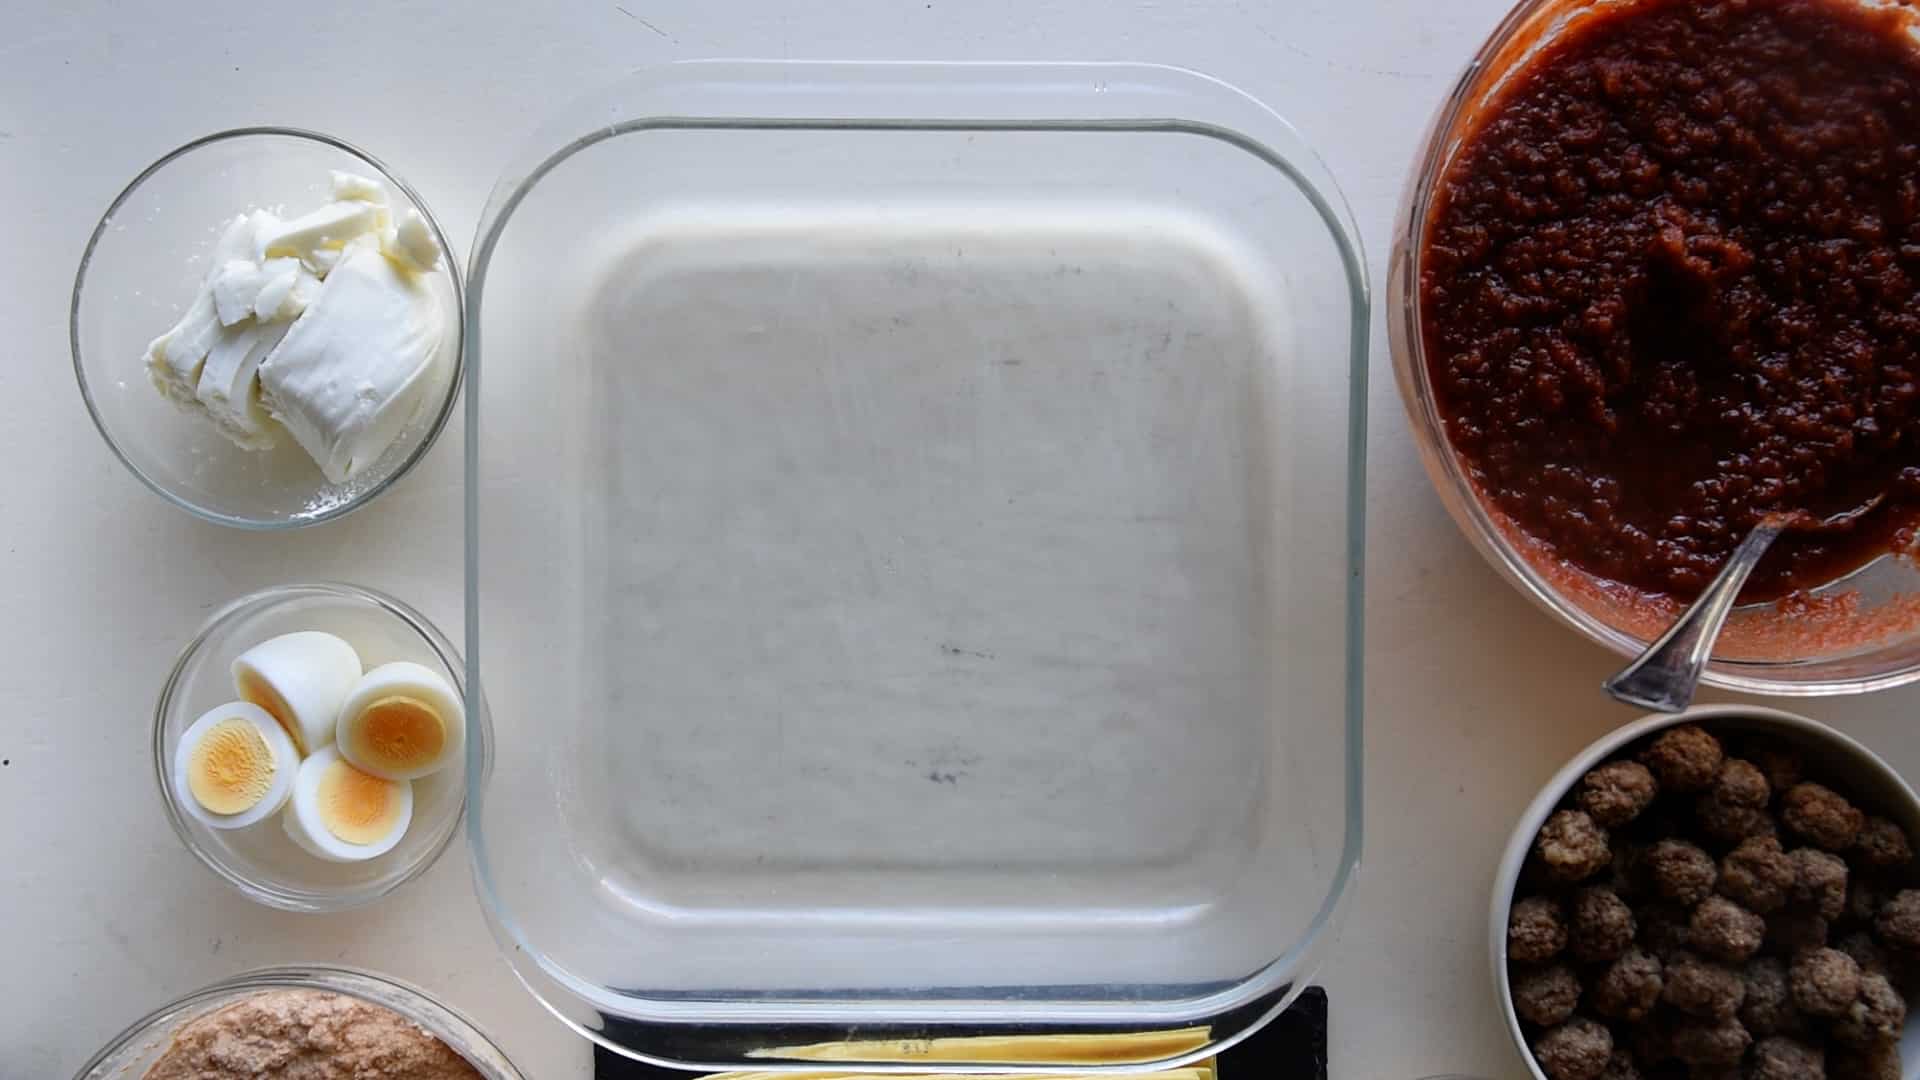 Place all the ingredients around the lasagna baking dish